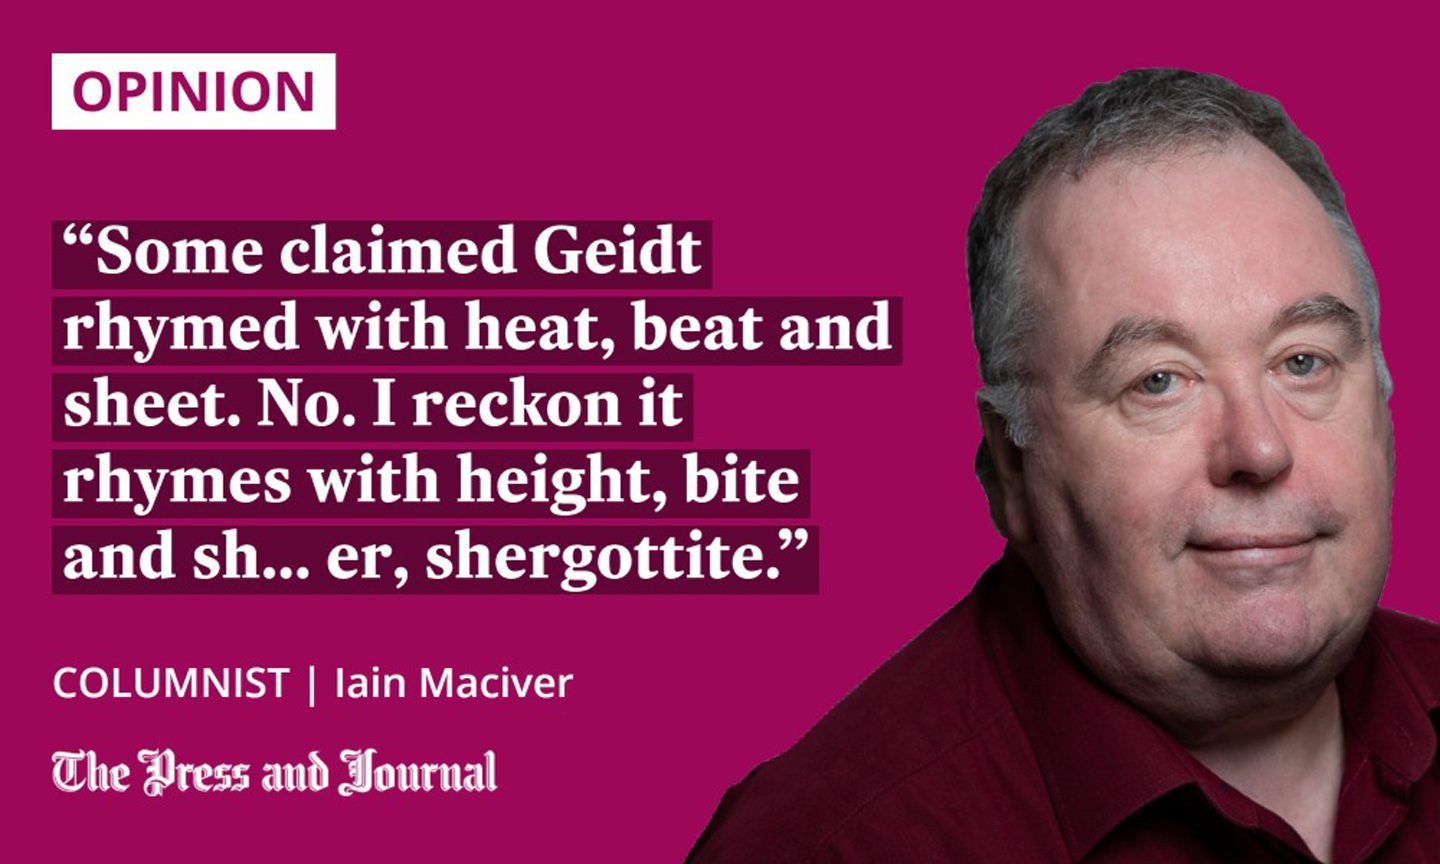 Columnist, Iain Maciver, speaks about Lord Christopher Geidt: "Some claimed it rhymed with heat, beat and sheet. No. I reckon it rhymes with height, bite and sh... er, shergottite."